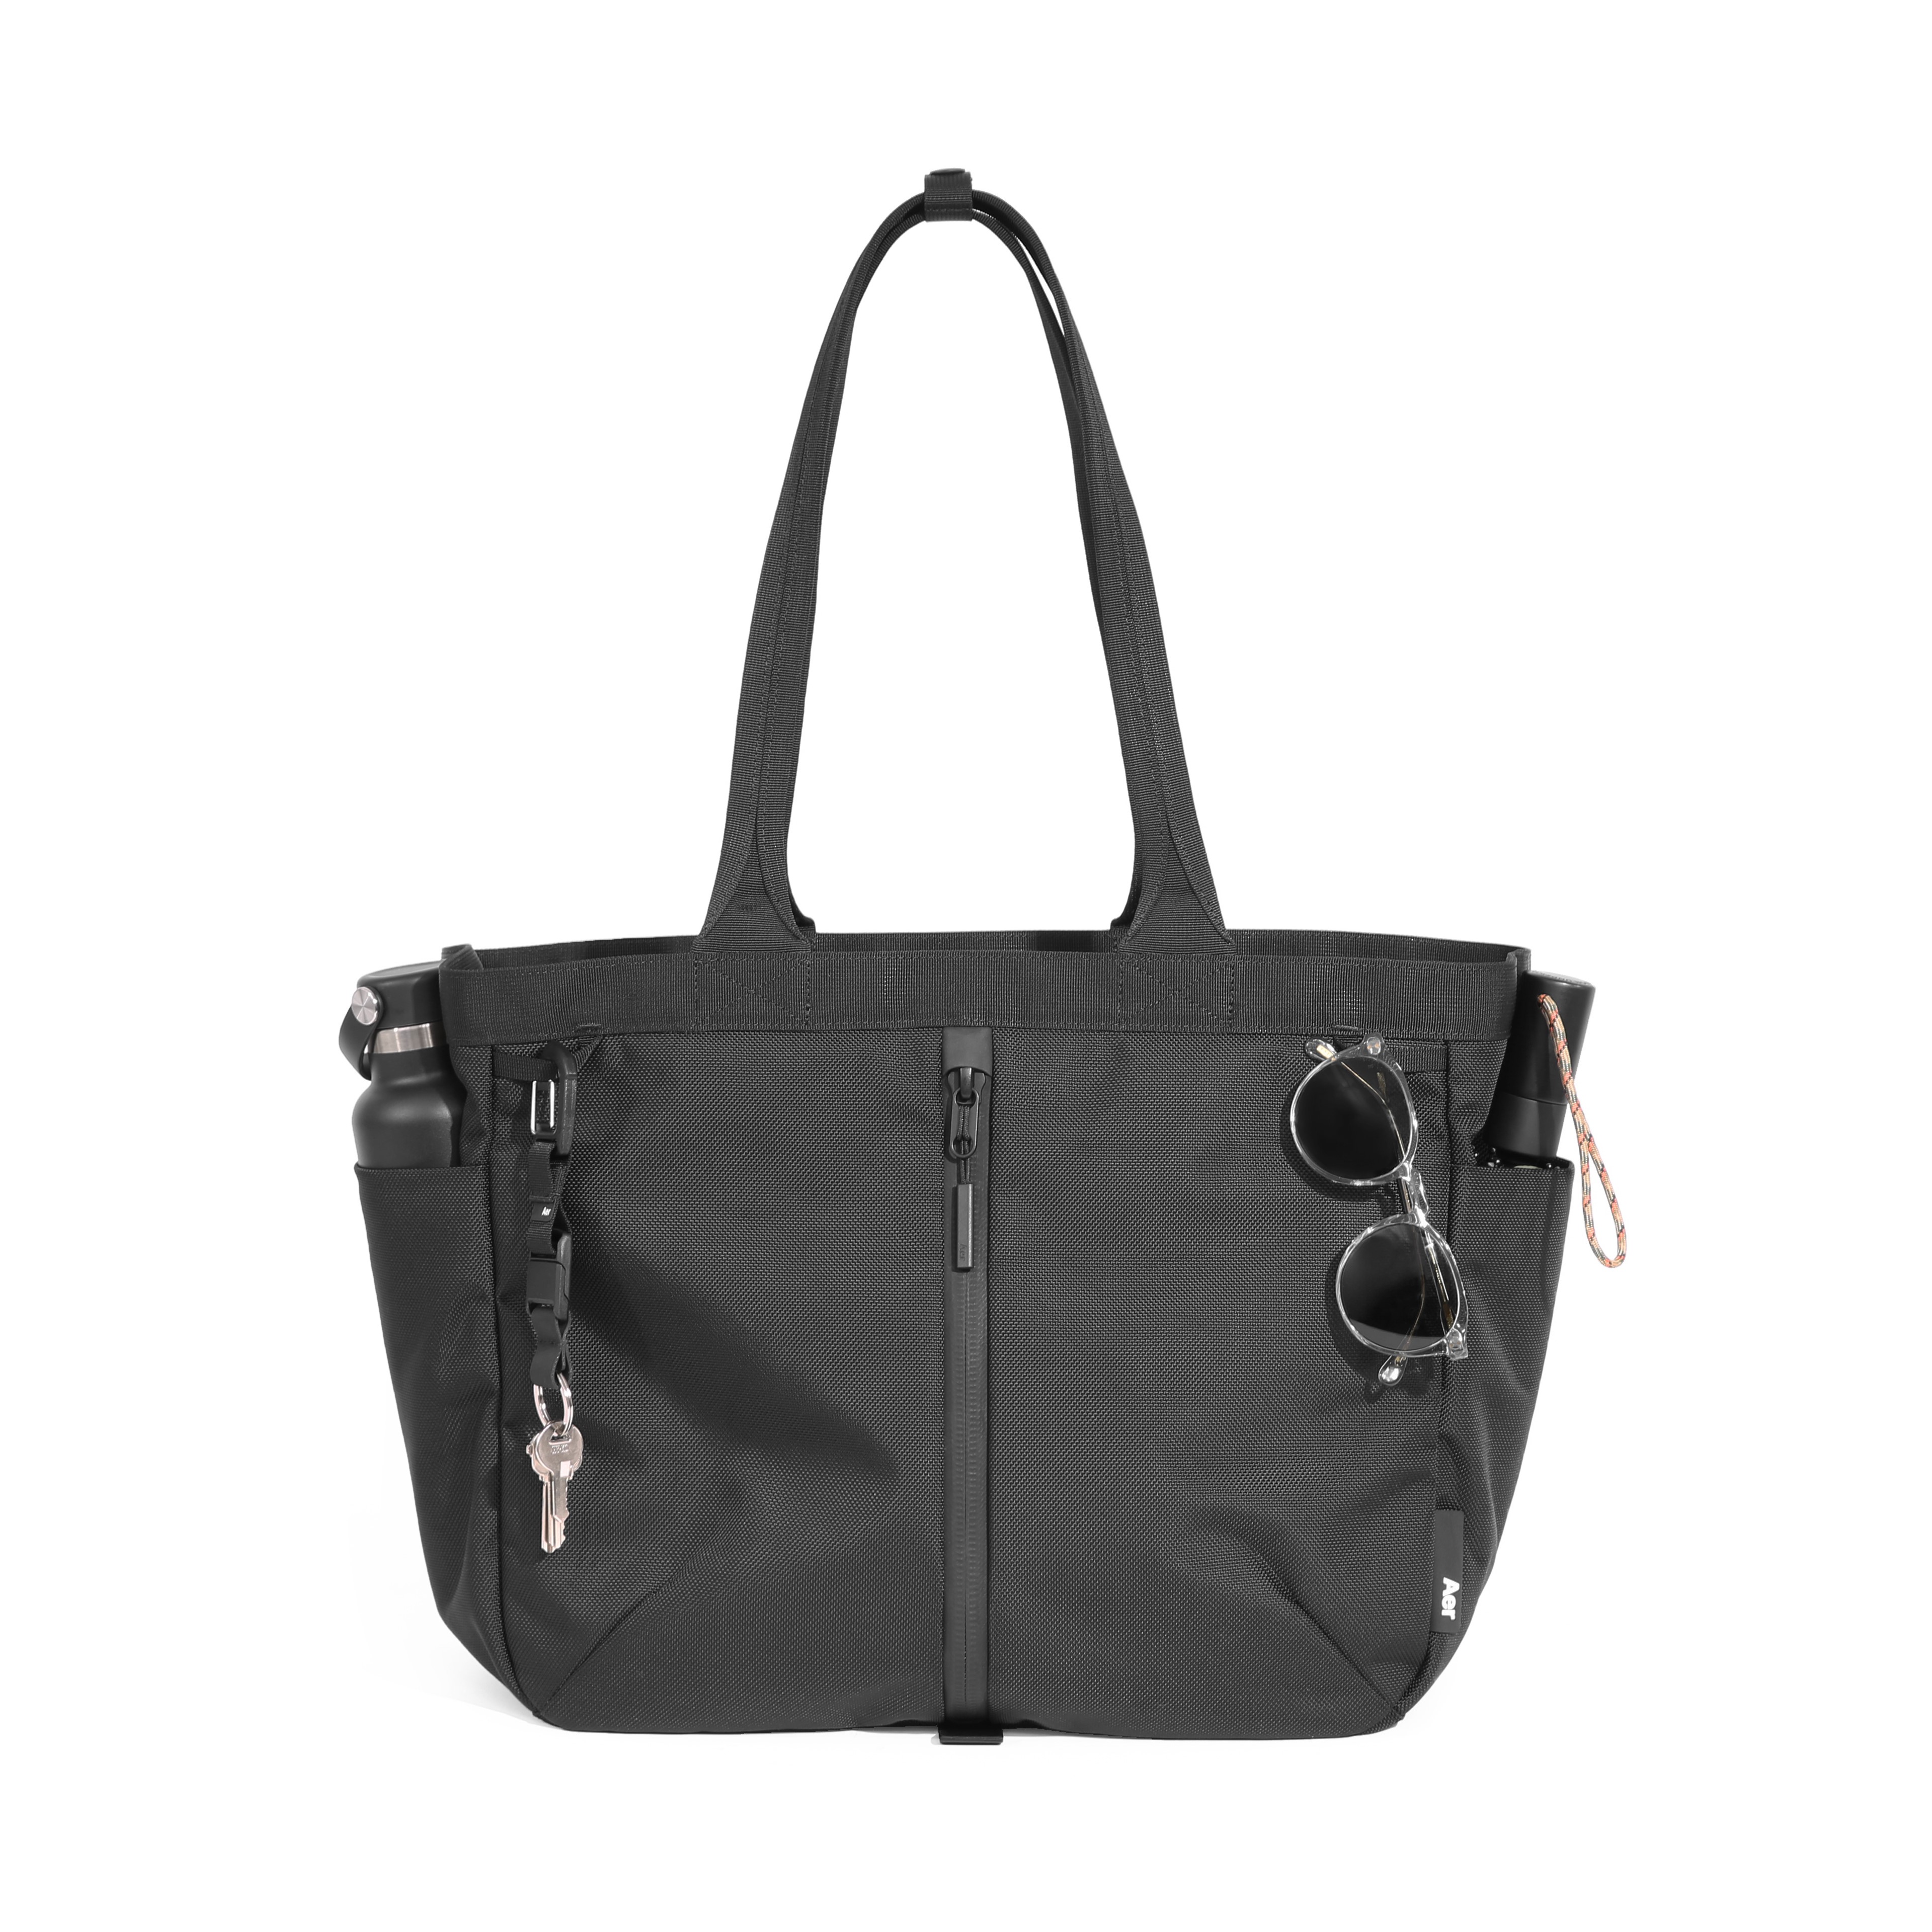 City Tote Black | Aer ｜ エアー公式通販サイト